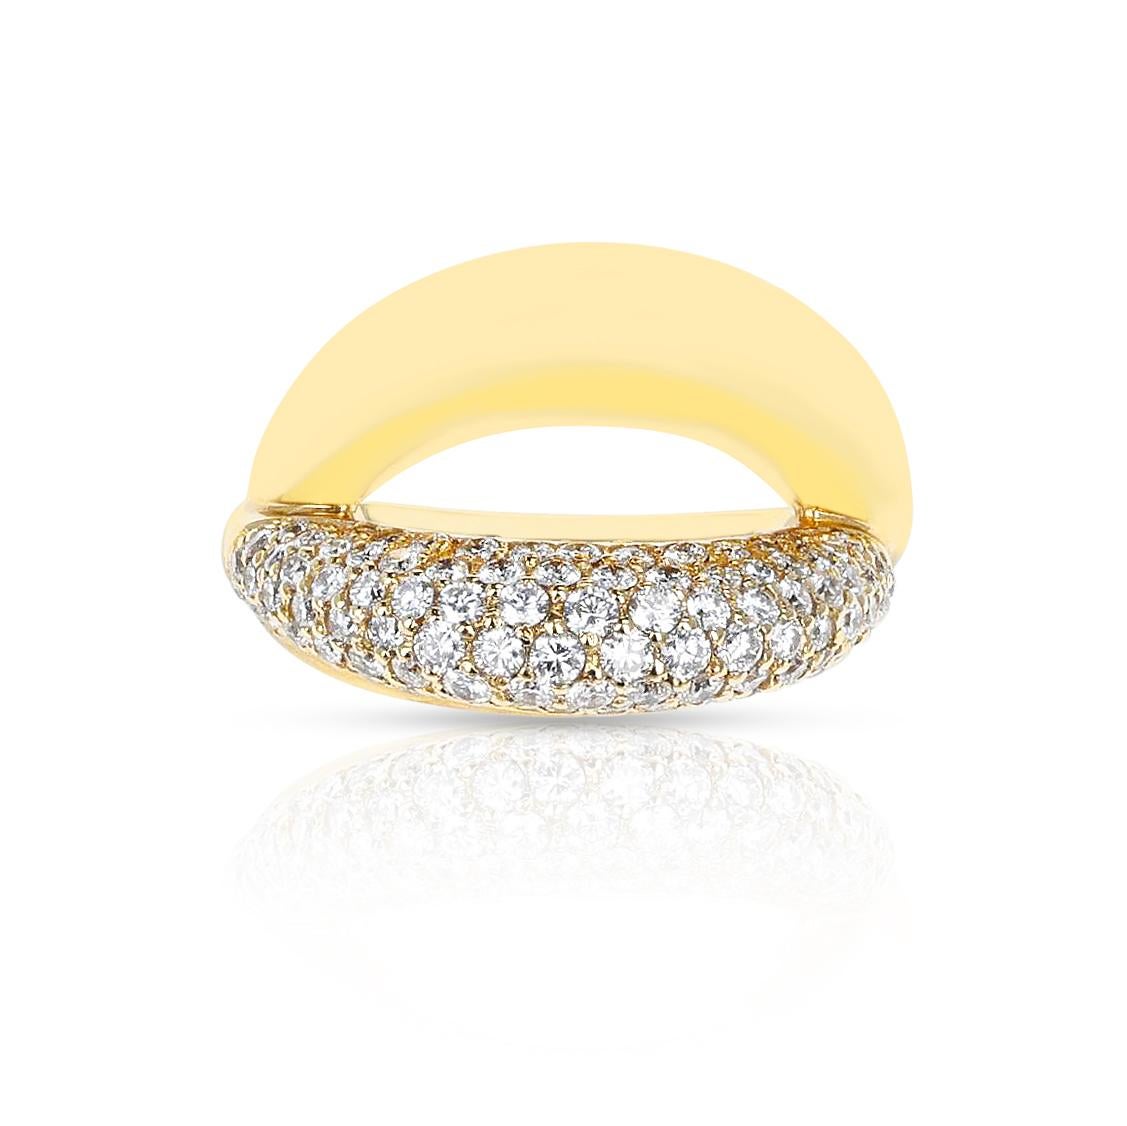 A Crossover Mauboussin Diamond Ring made in 18 Karat Yellow Gold.  The diamond weight is 1.40 carats. The total weight of the ring is 11.40 grams. We have the following ring sizes available in US sizing: 4.50, 5, 5.50, 5.75.